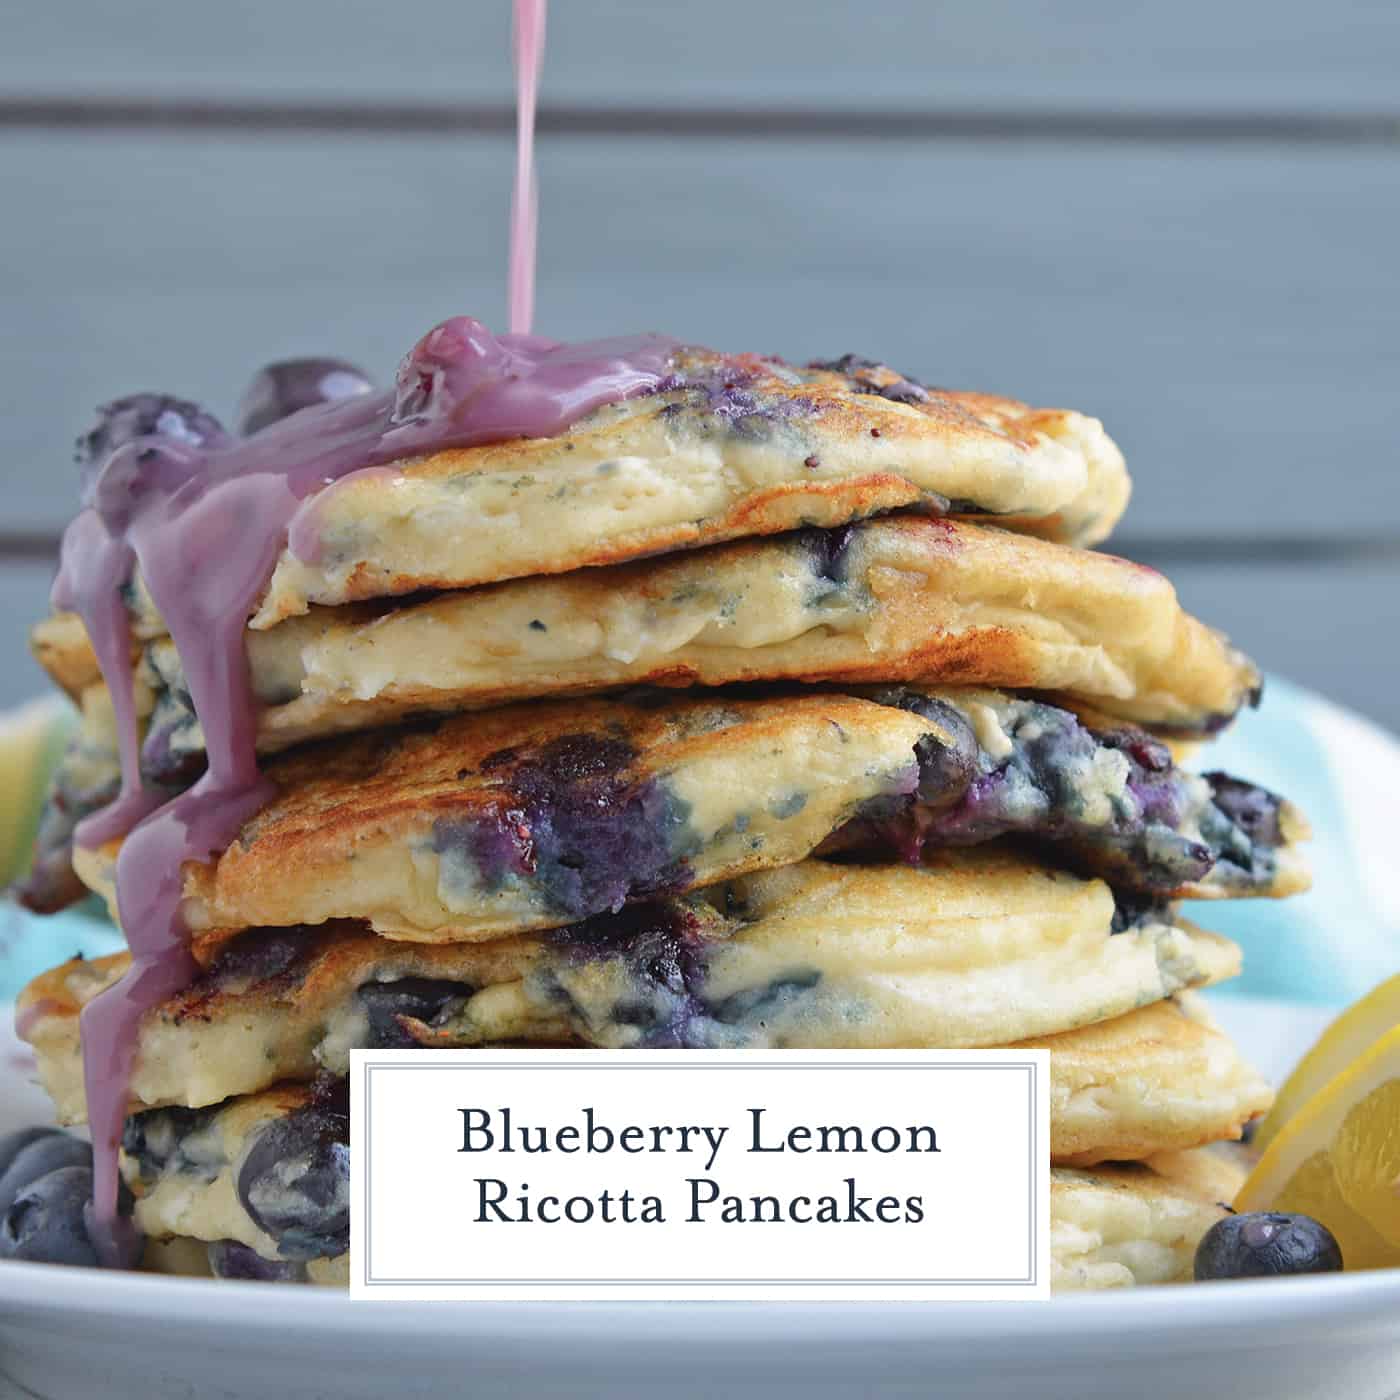 Blueberry Lemon Ricotta Pancakes are easy blueberry pancakes made with creamy ricotta cheese. Ricotta hotcakes are a super fluffy pancake recipe. The best pancakes from scratch! #lemonricottapancakes #bestblueberrypancakes www.savoryexperiments.com